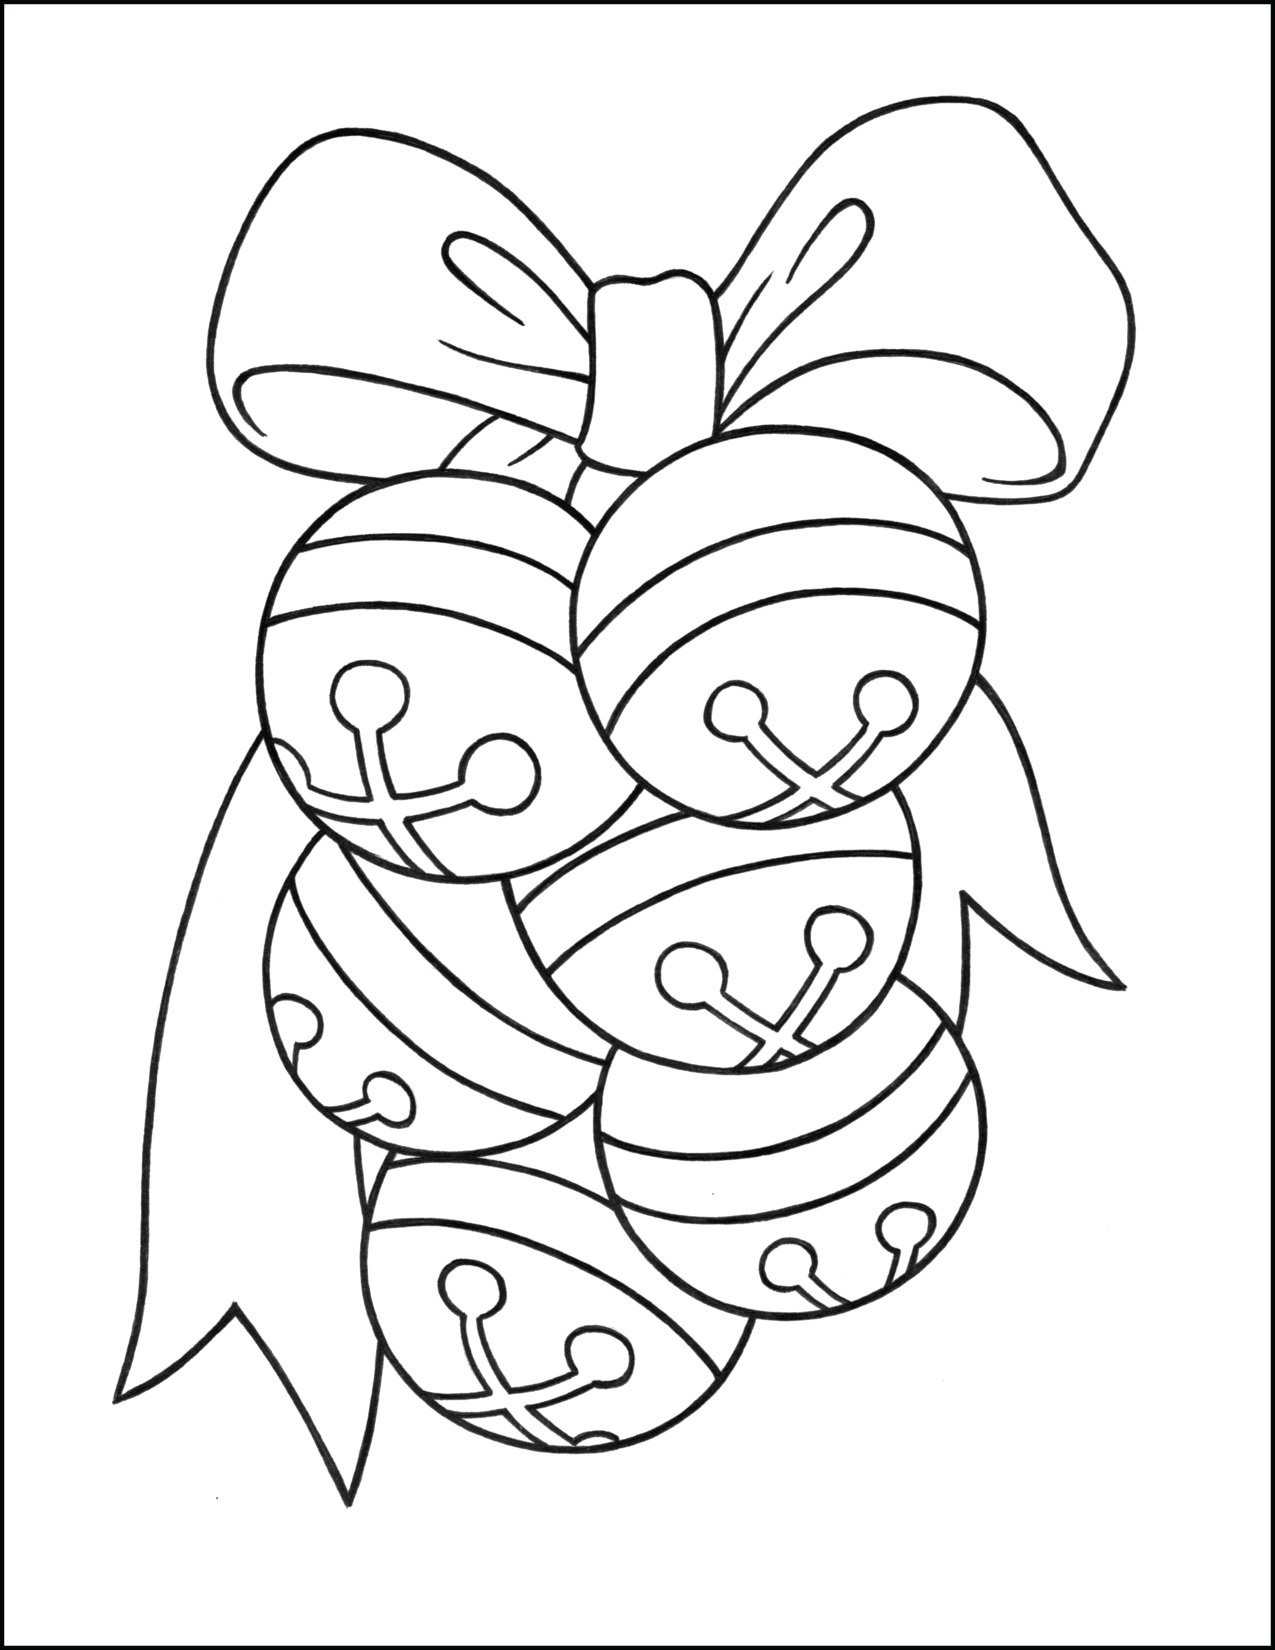 Christmas coloring pages jingle bells